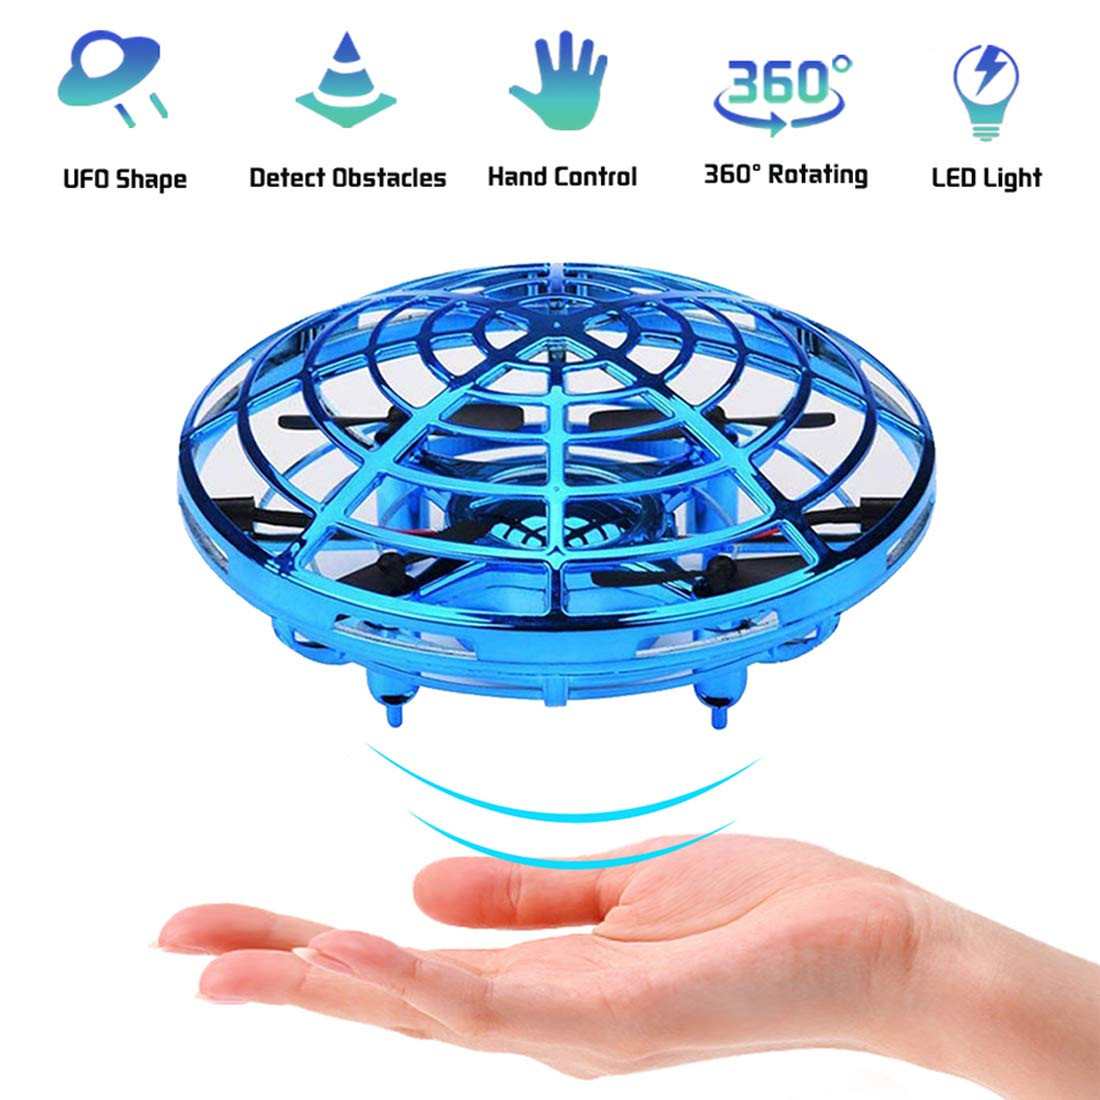 Hand Operated Drones for Kids or Adults Easy Indoor Small Flying Toys for Boys or Gir UFO Flying Ball Toys Blue Helicopter with 360° Rotating and Shinning LED Lights 